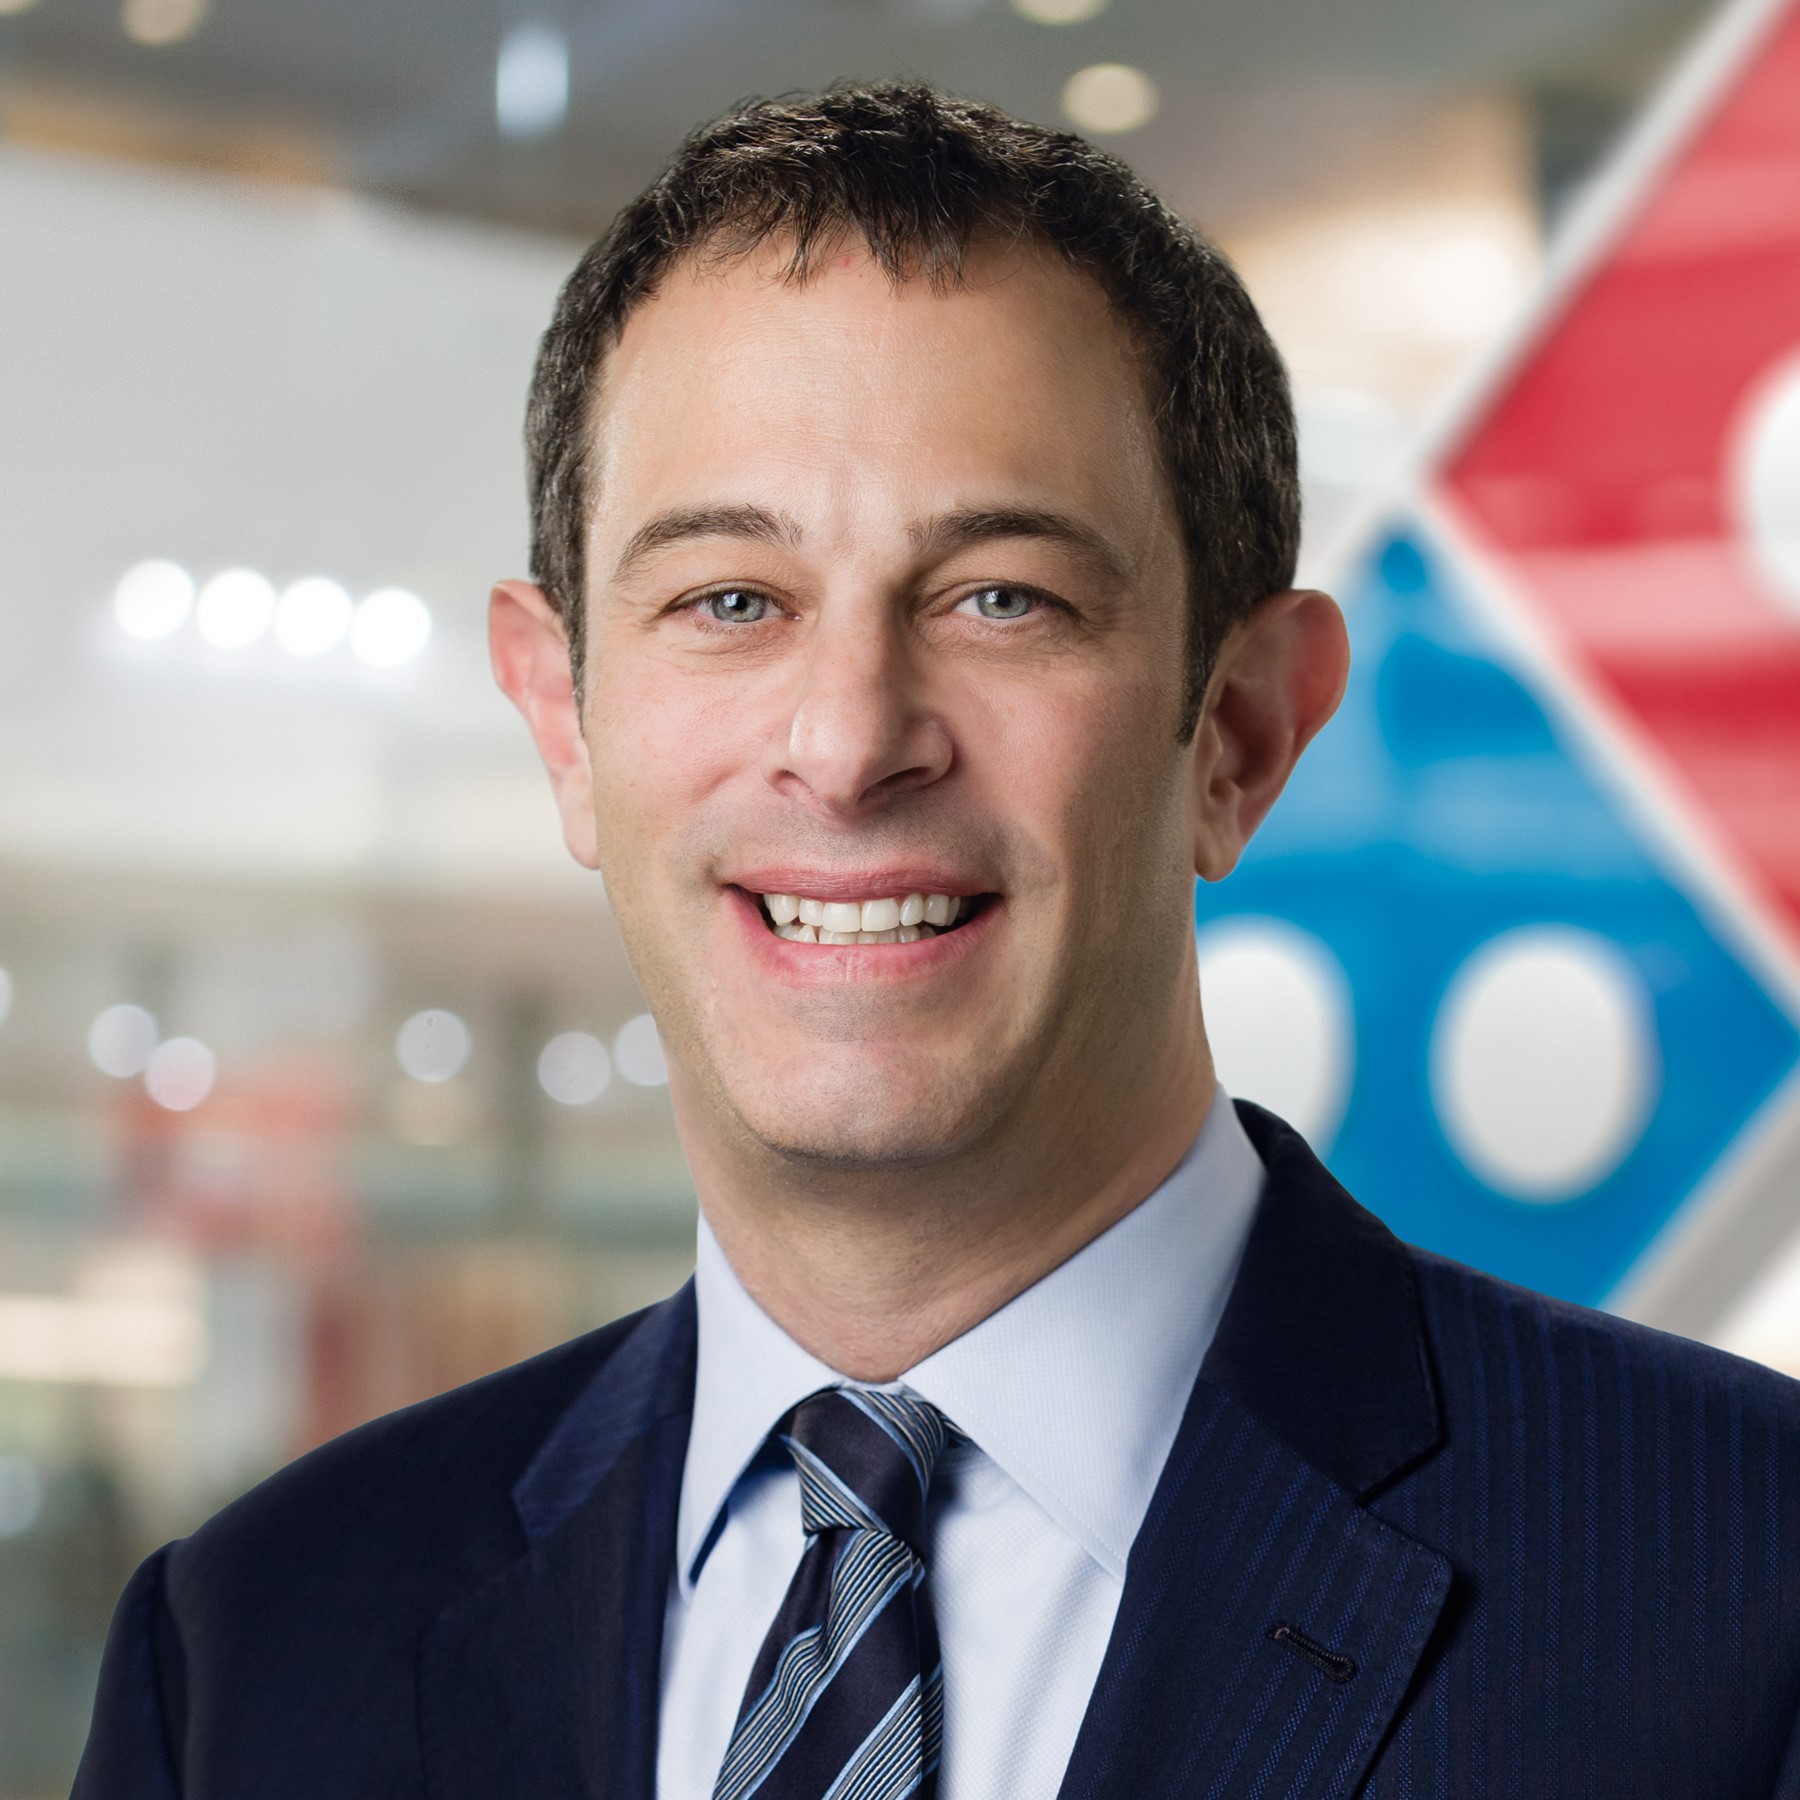 Russell Weiner, COO and President of Domino’s U.S., joins High Point University as Corporate Executive in Residence.